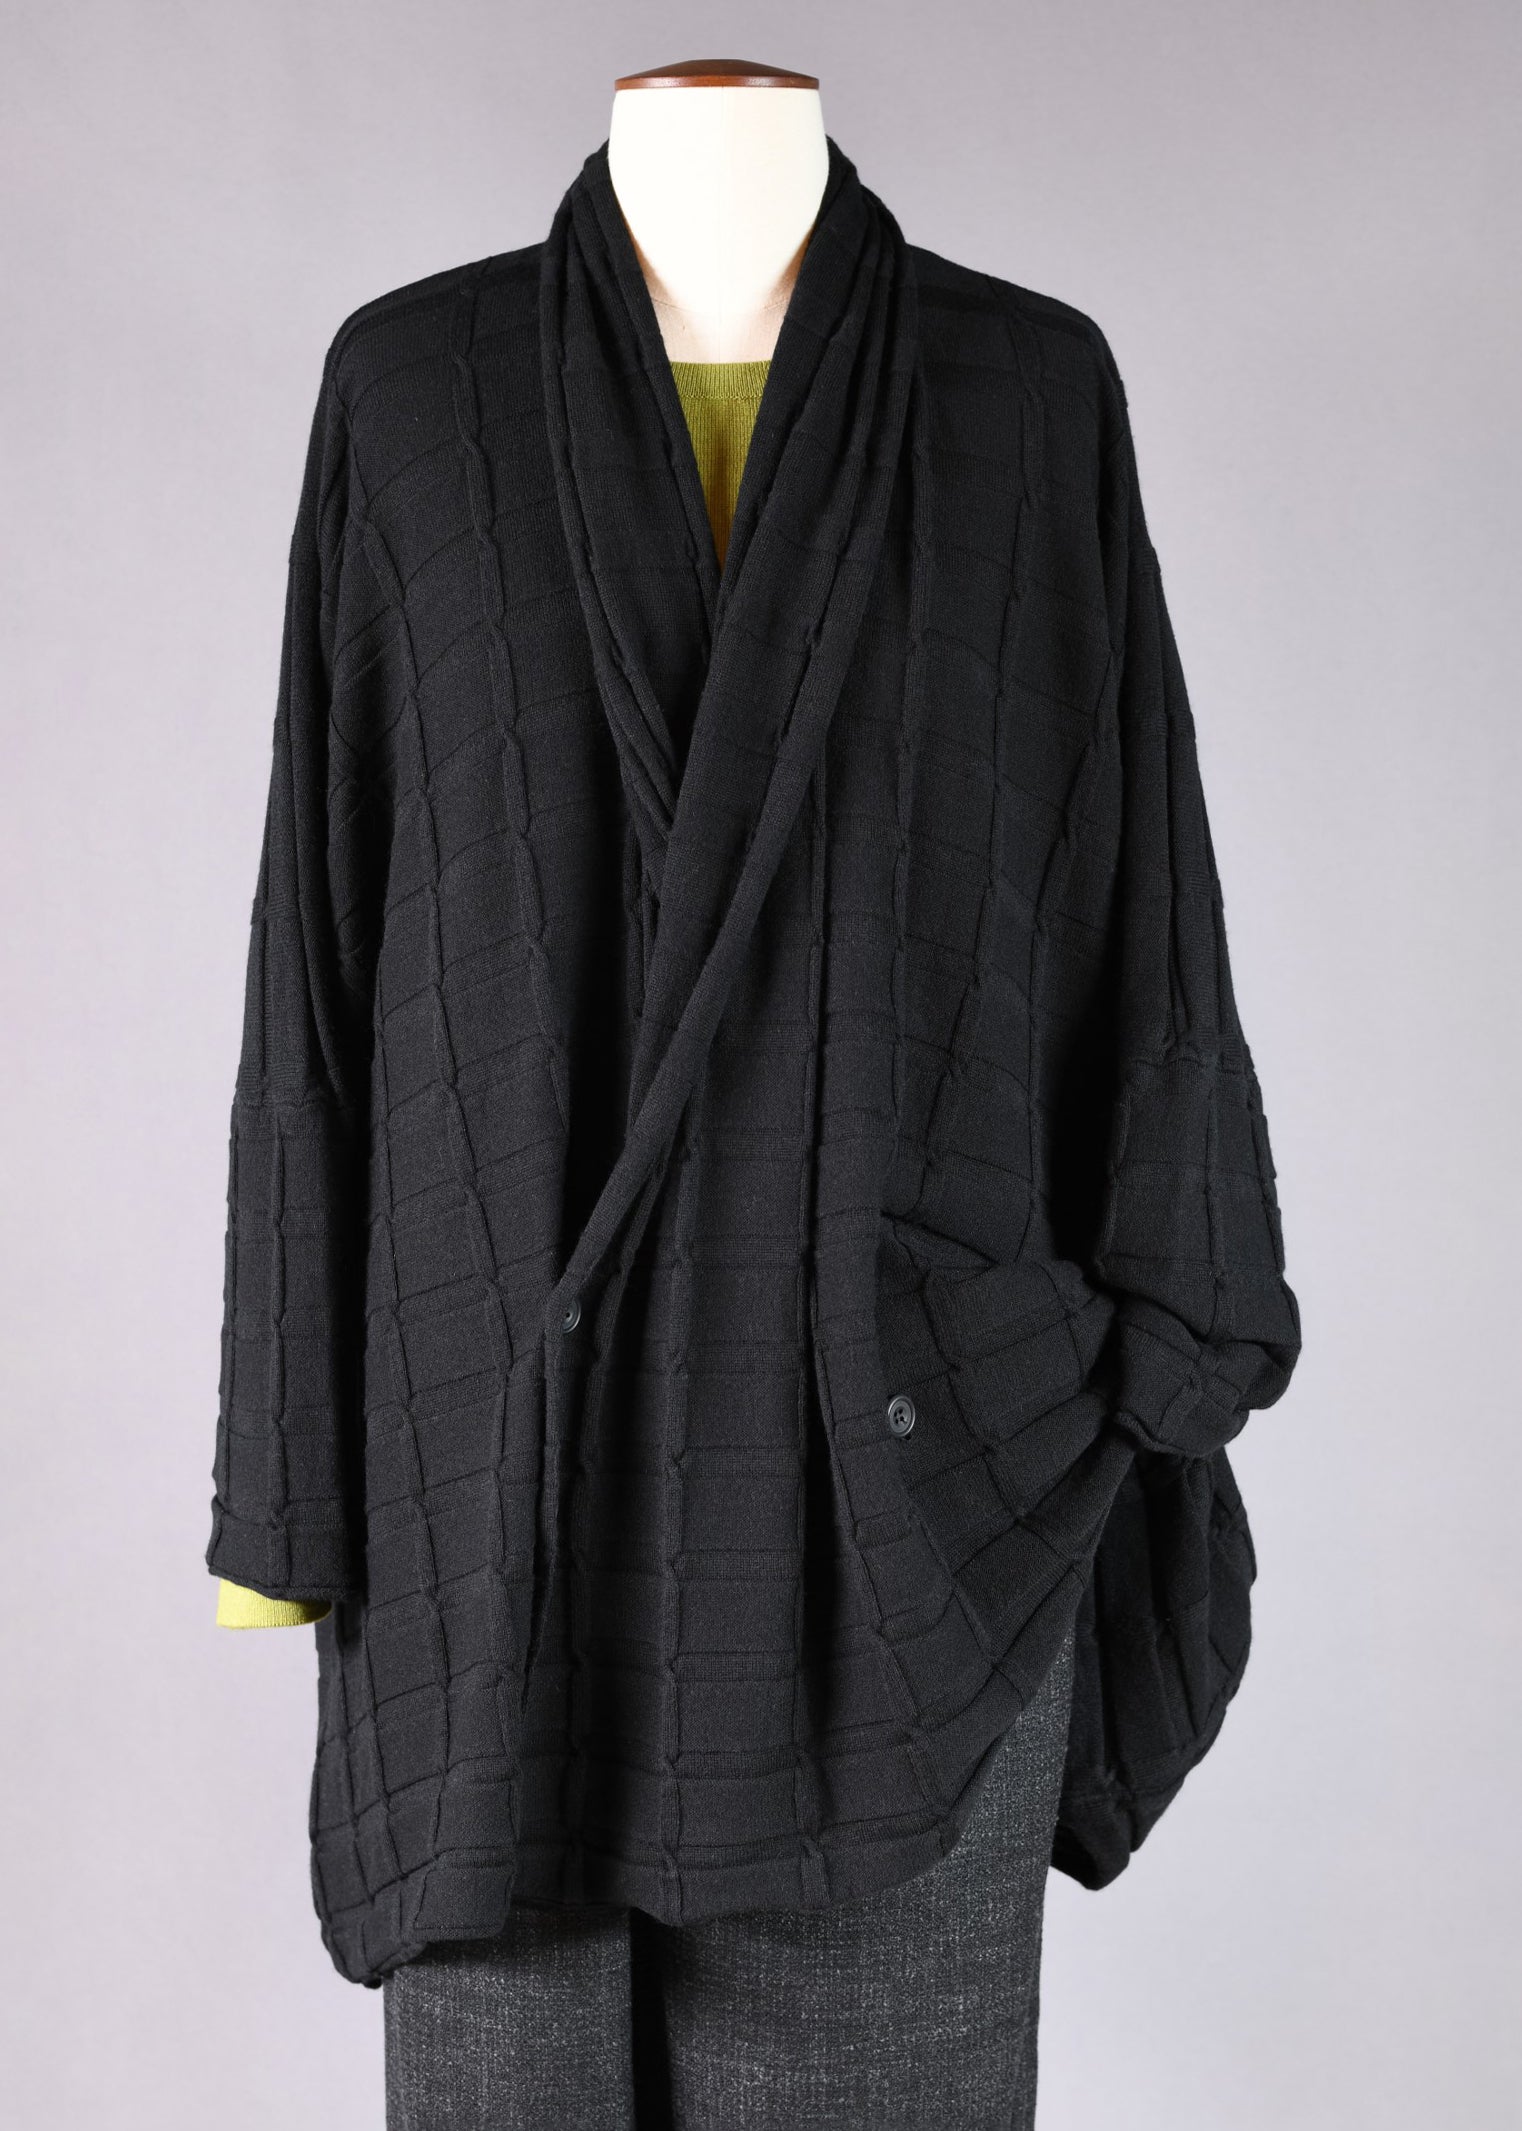 wide square extended shawl collar cardigan coat - long